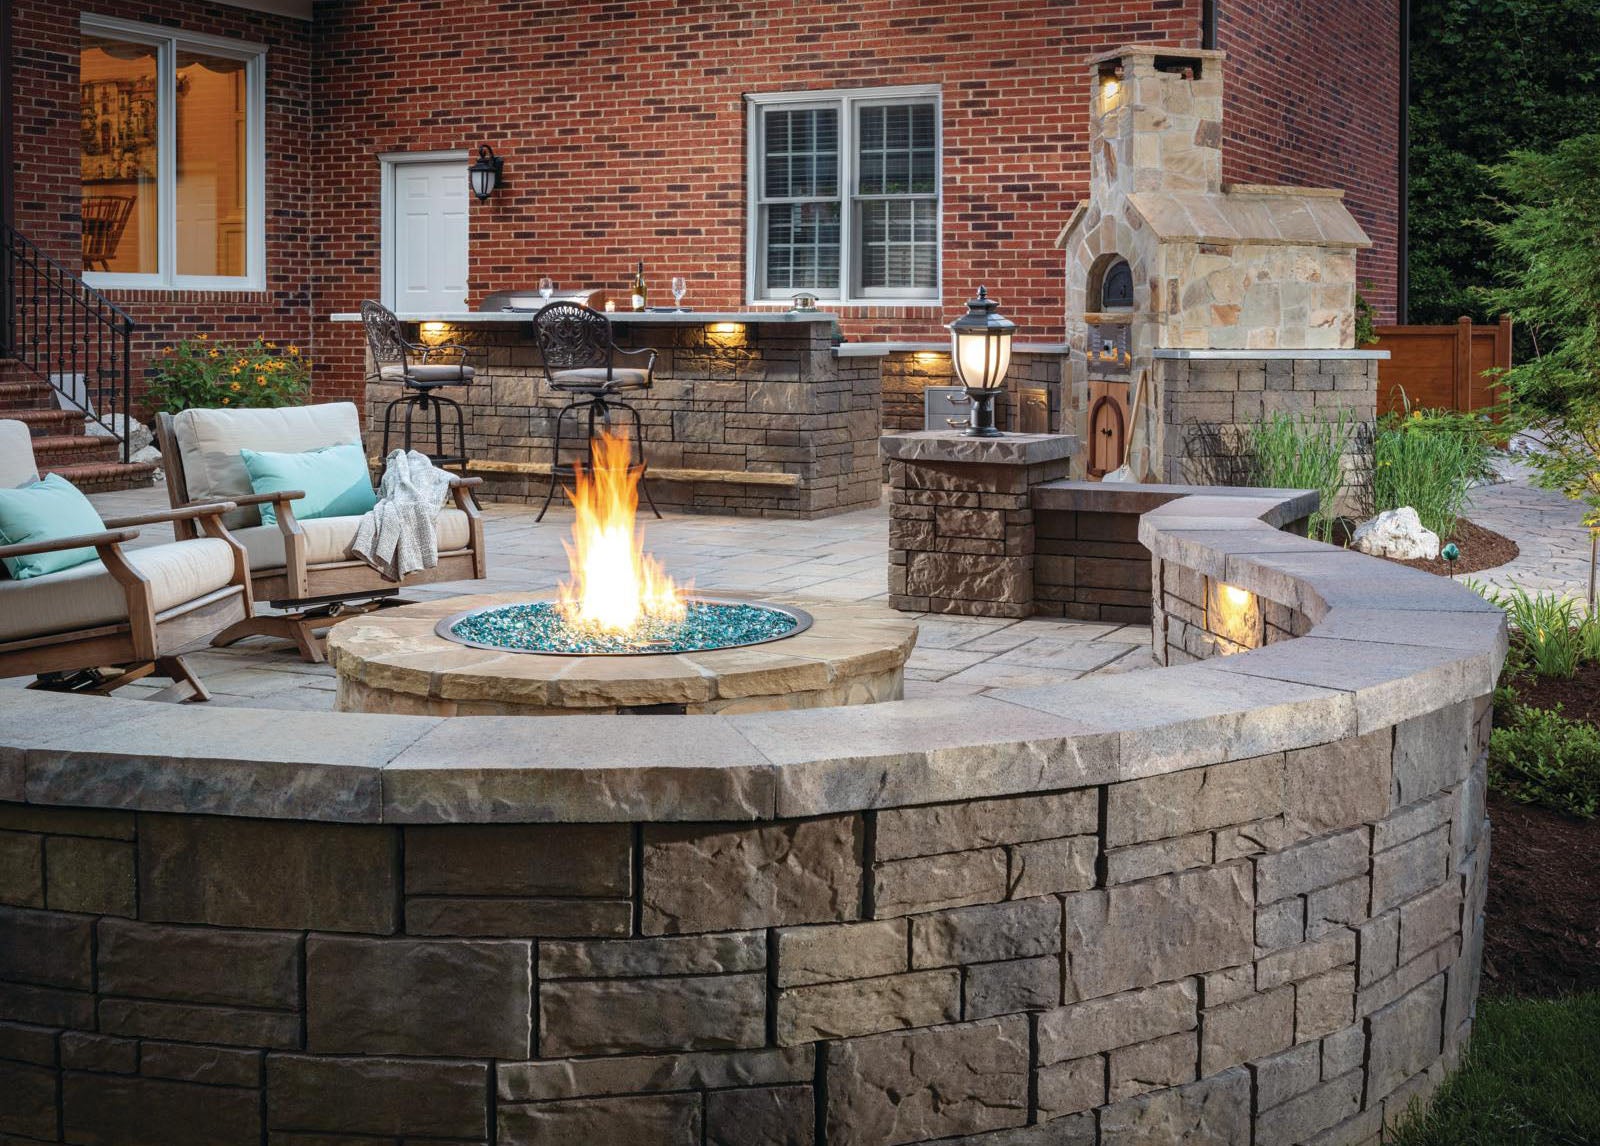 Designing A Patio Around Fire Pit, Build A Fire Pit In My Backyard